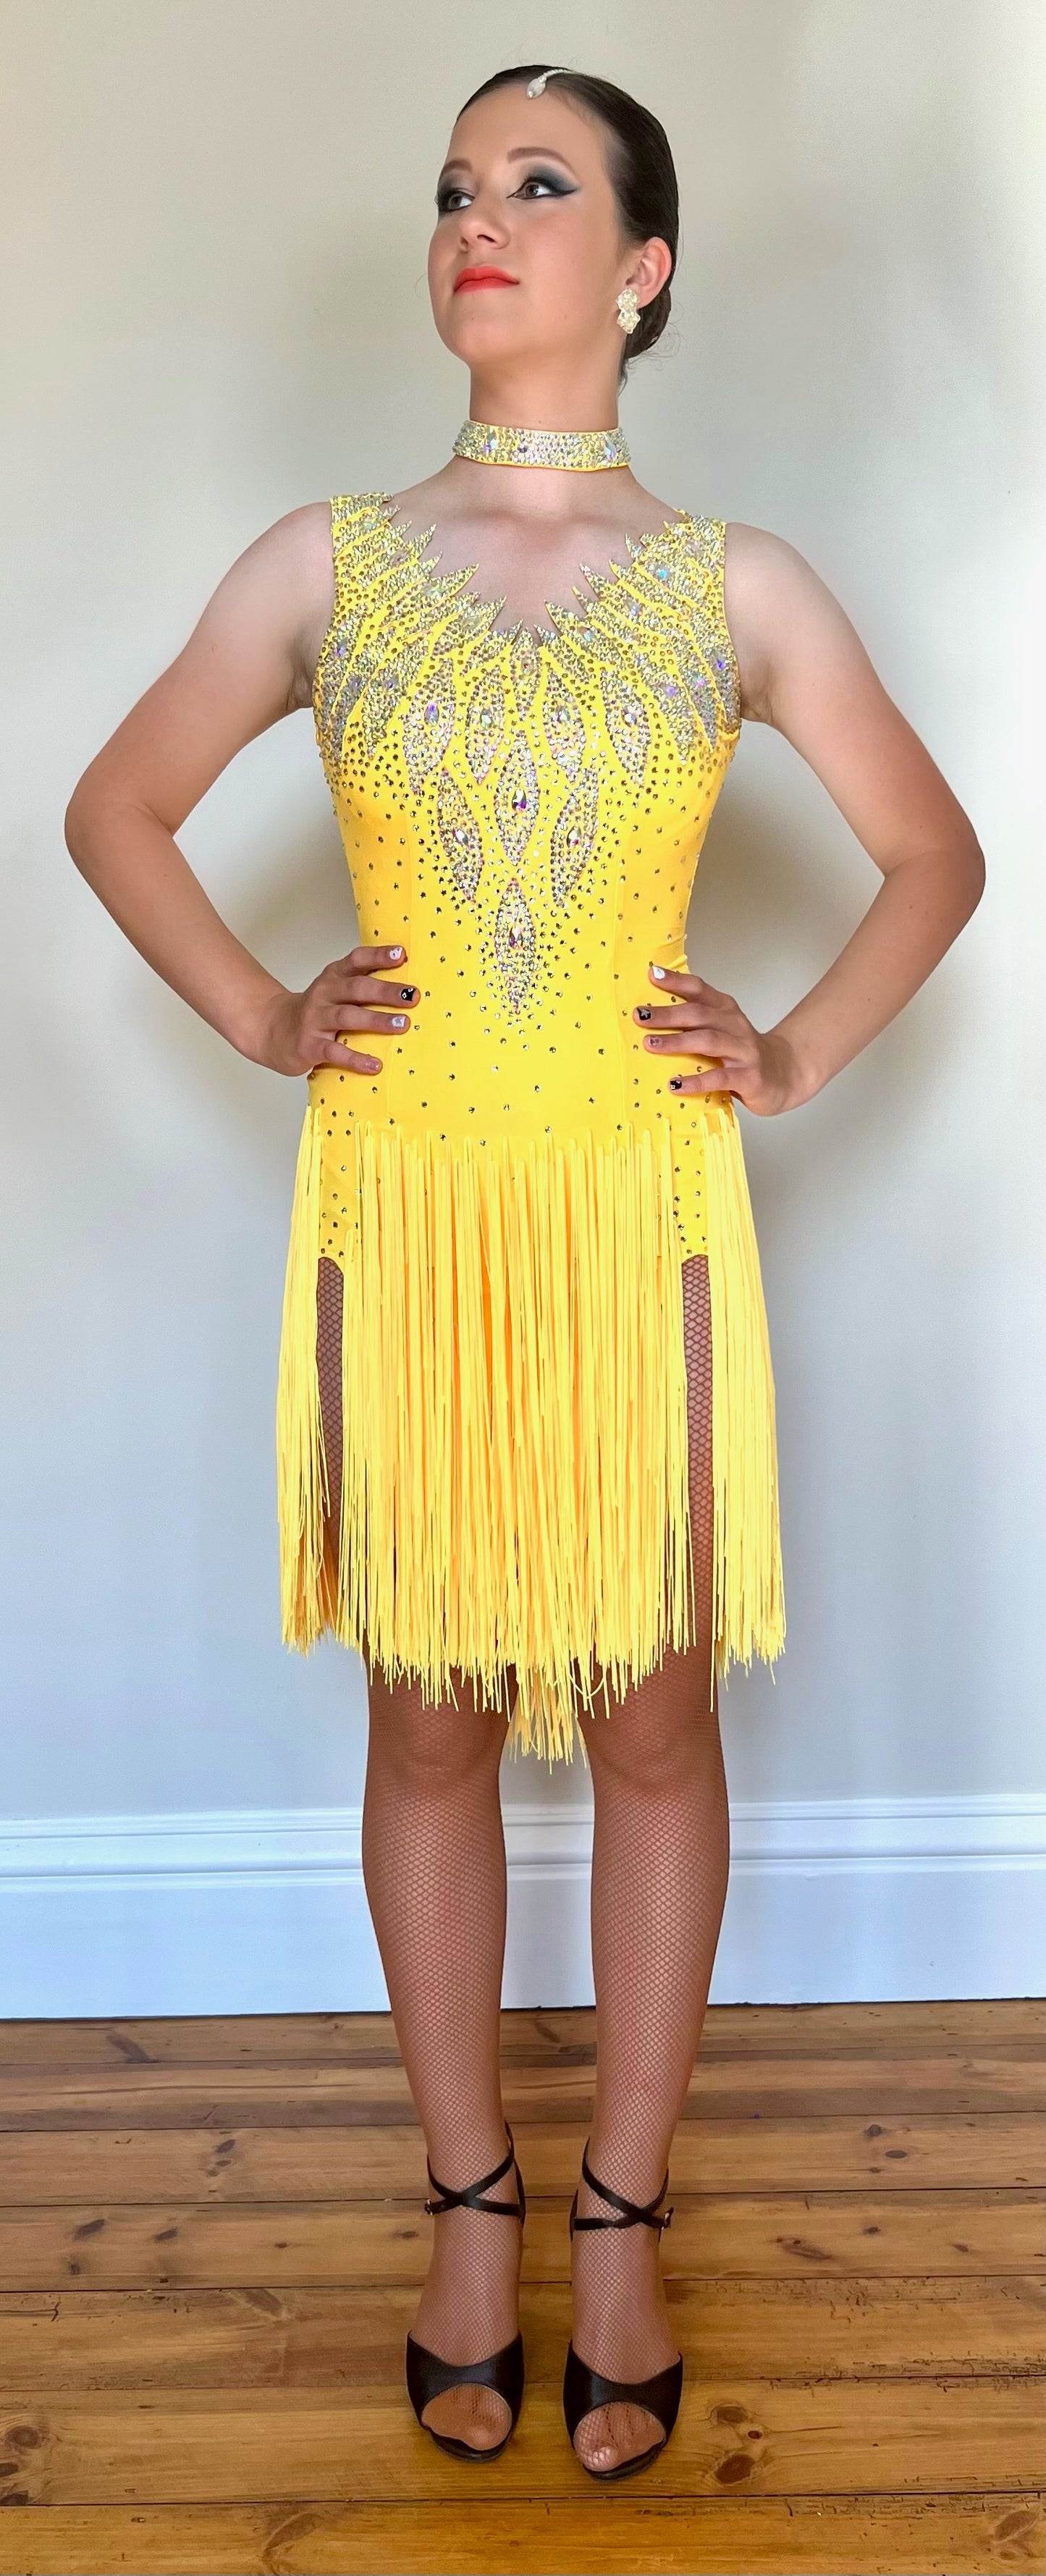 110 Yellow Leaf design Fringe skirt Latin Dress. Open back with leaf detail, necklace with hanging detail.